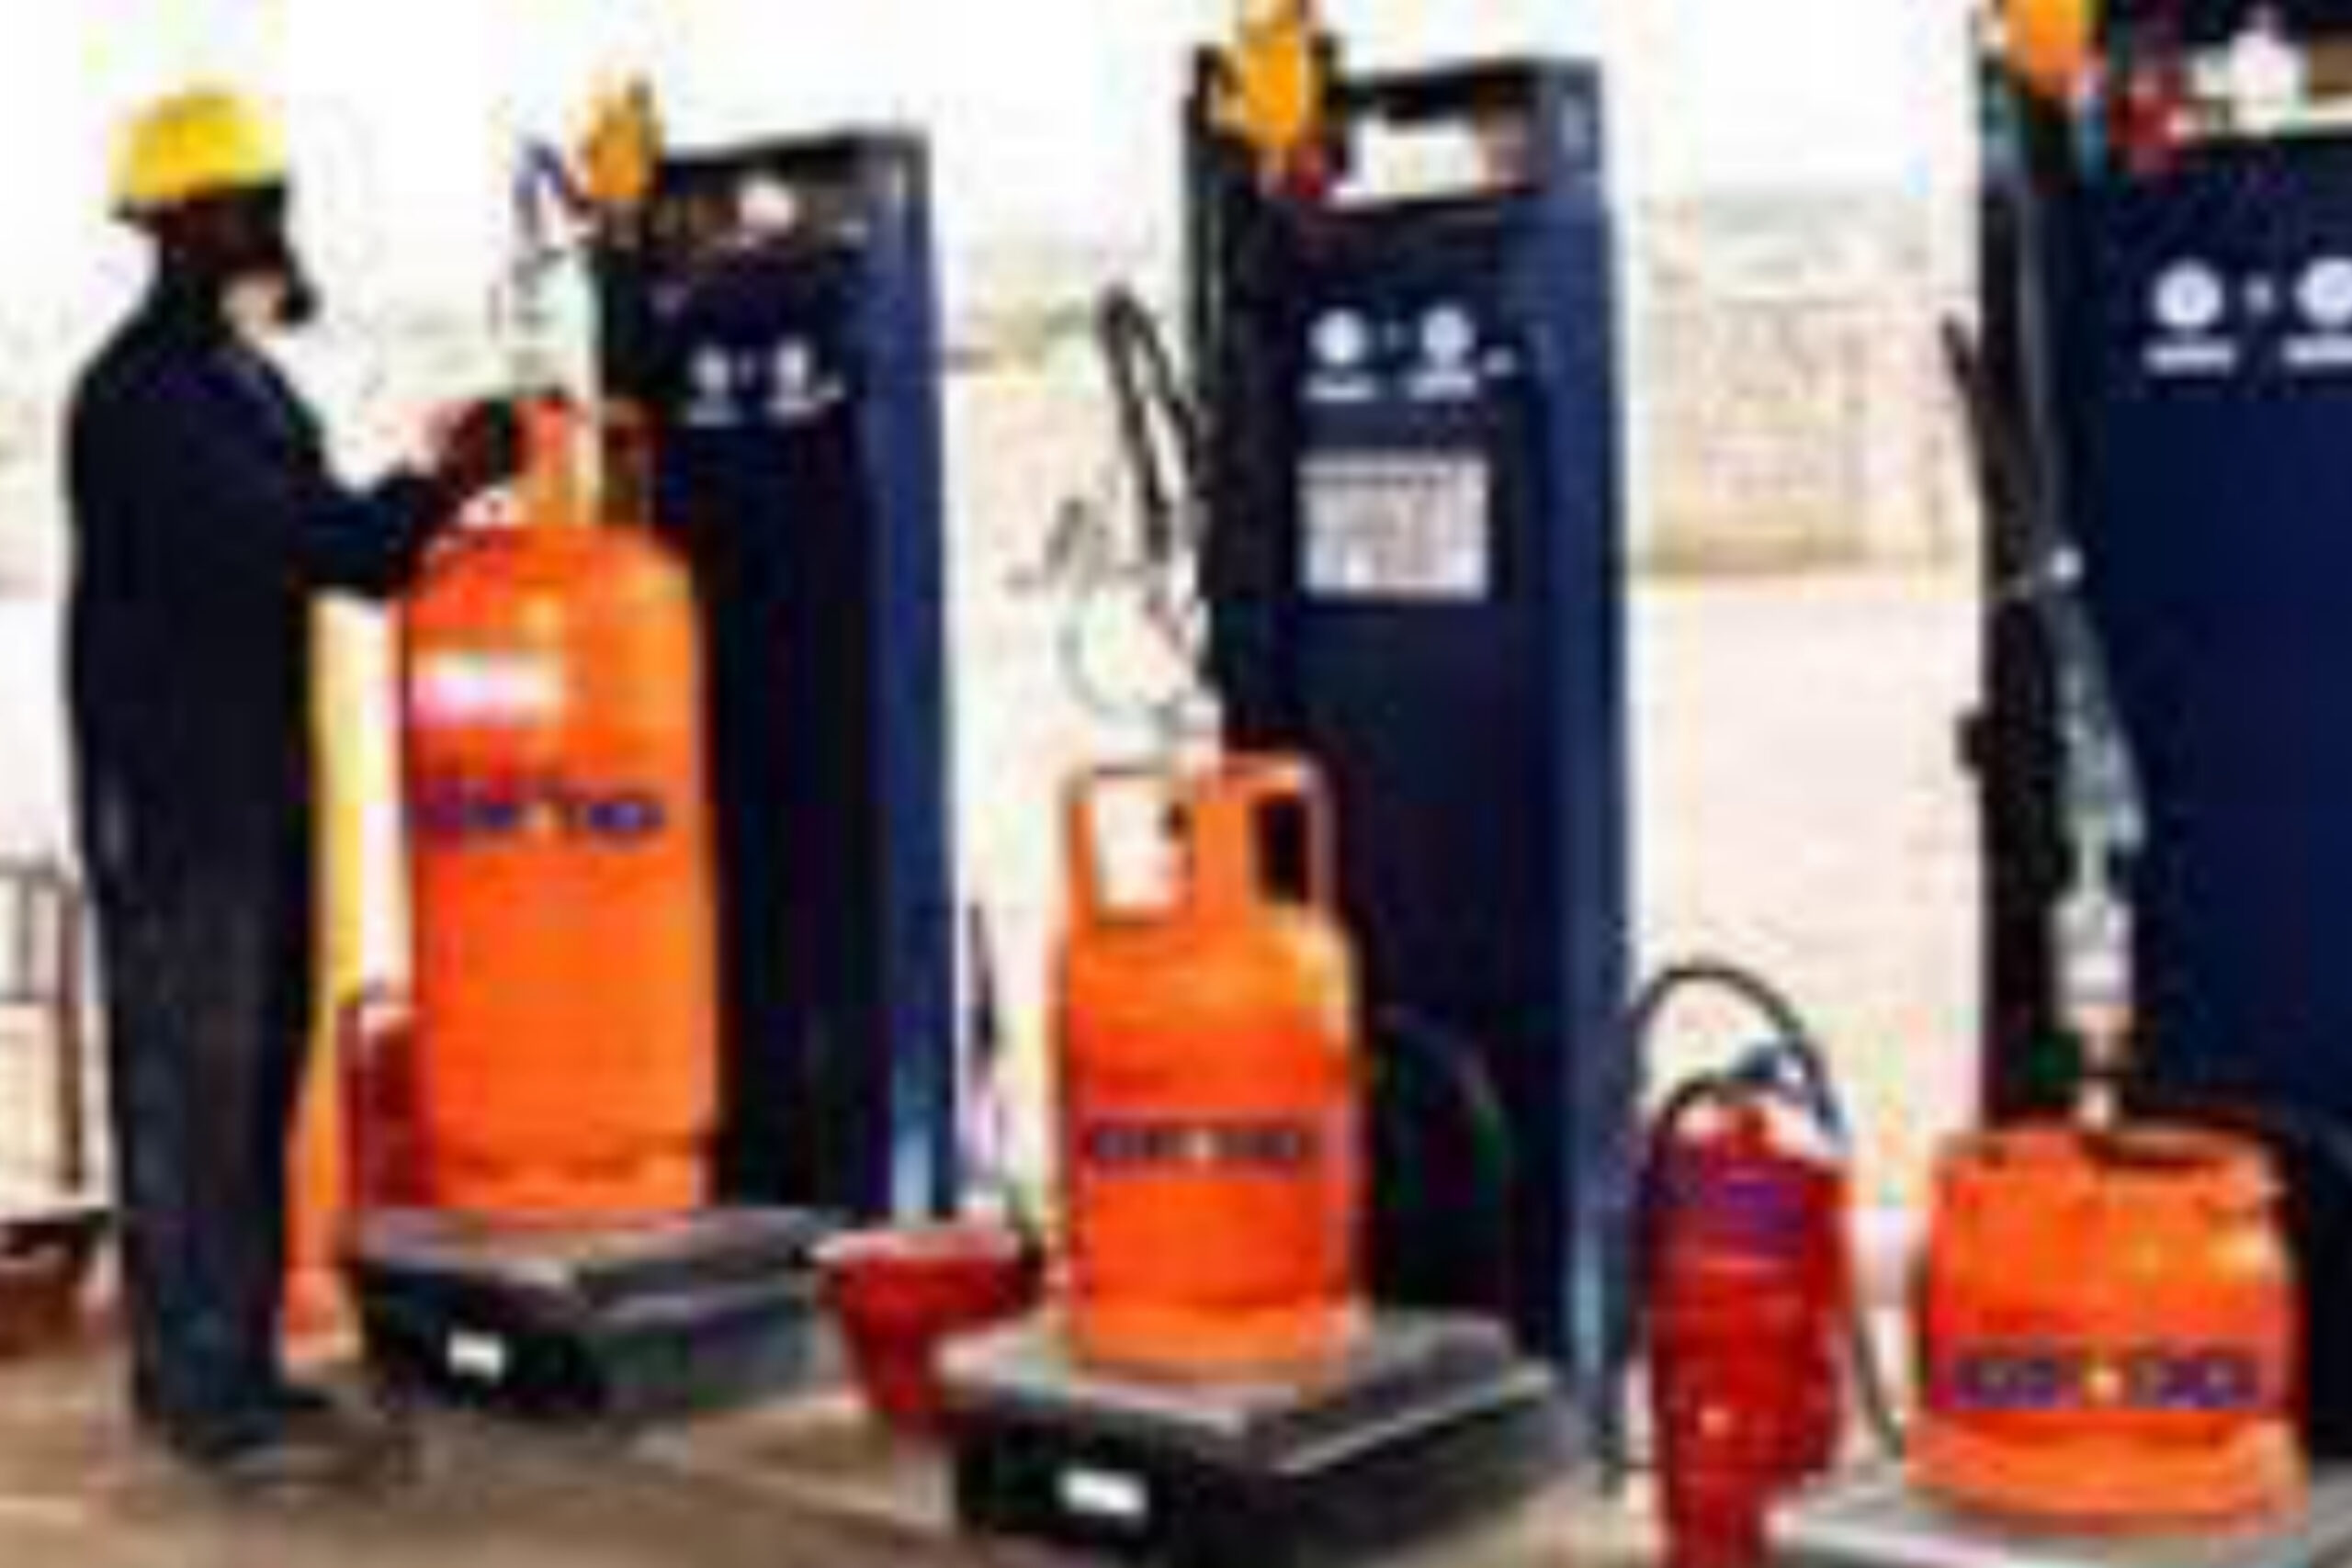 Price of cooking gas rises by 89% in 12 months - 21st CENTURY CHRONICLE